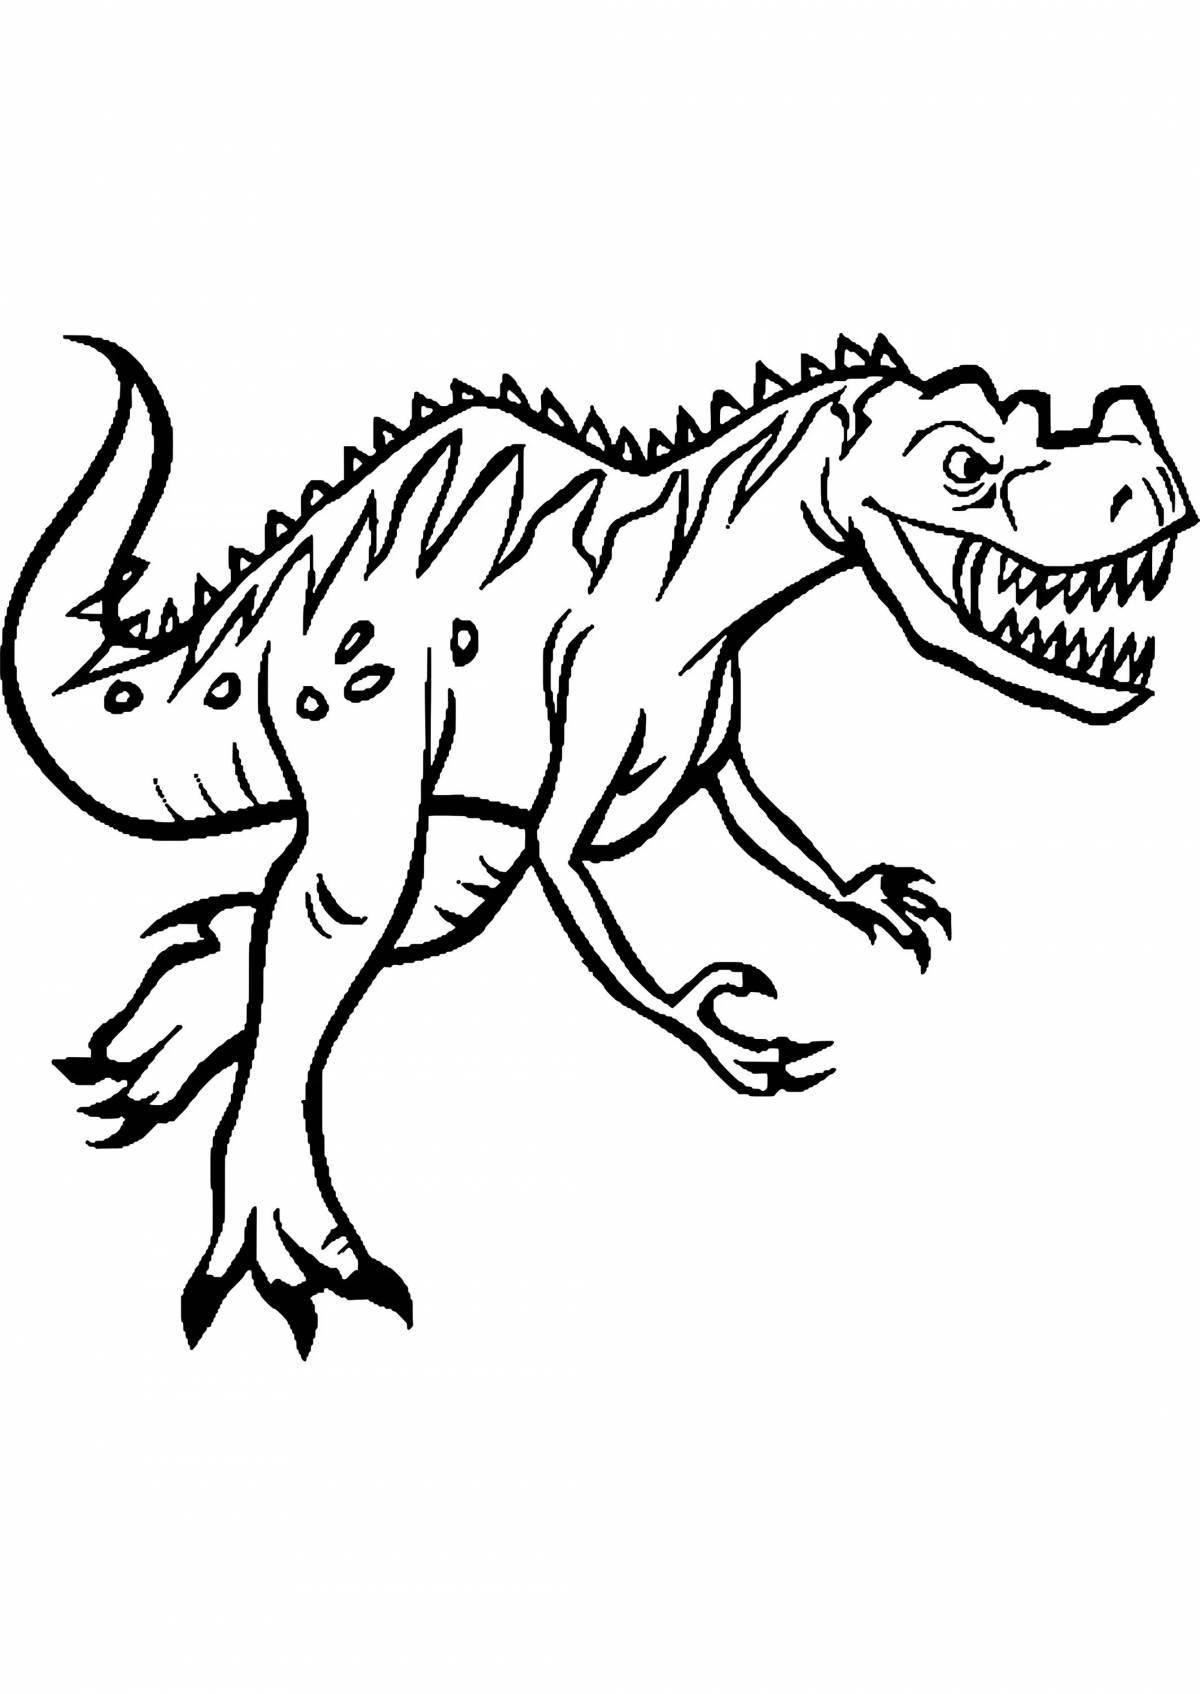 Exquisite rex dinosaur coloring book for kids